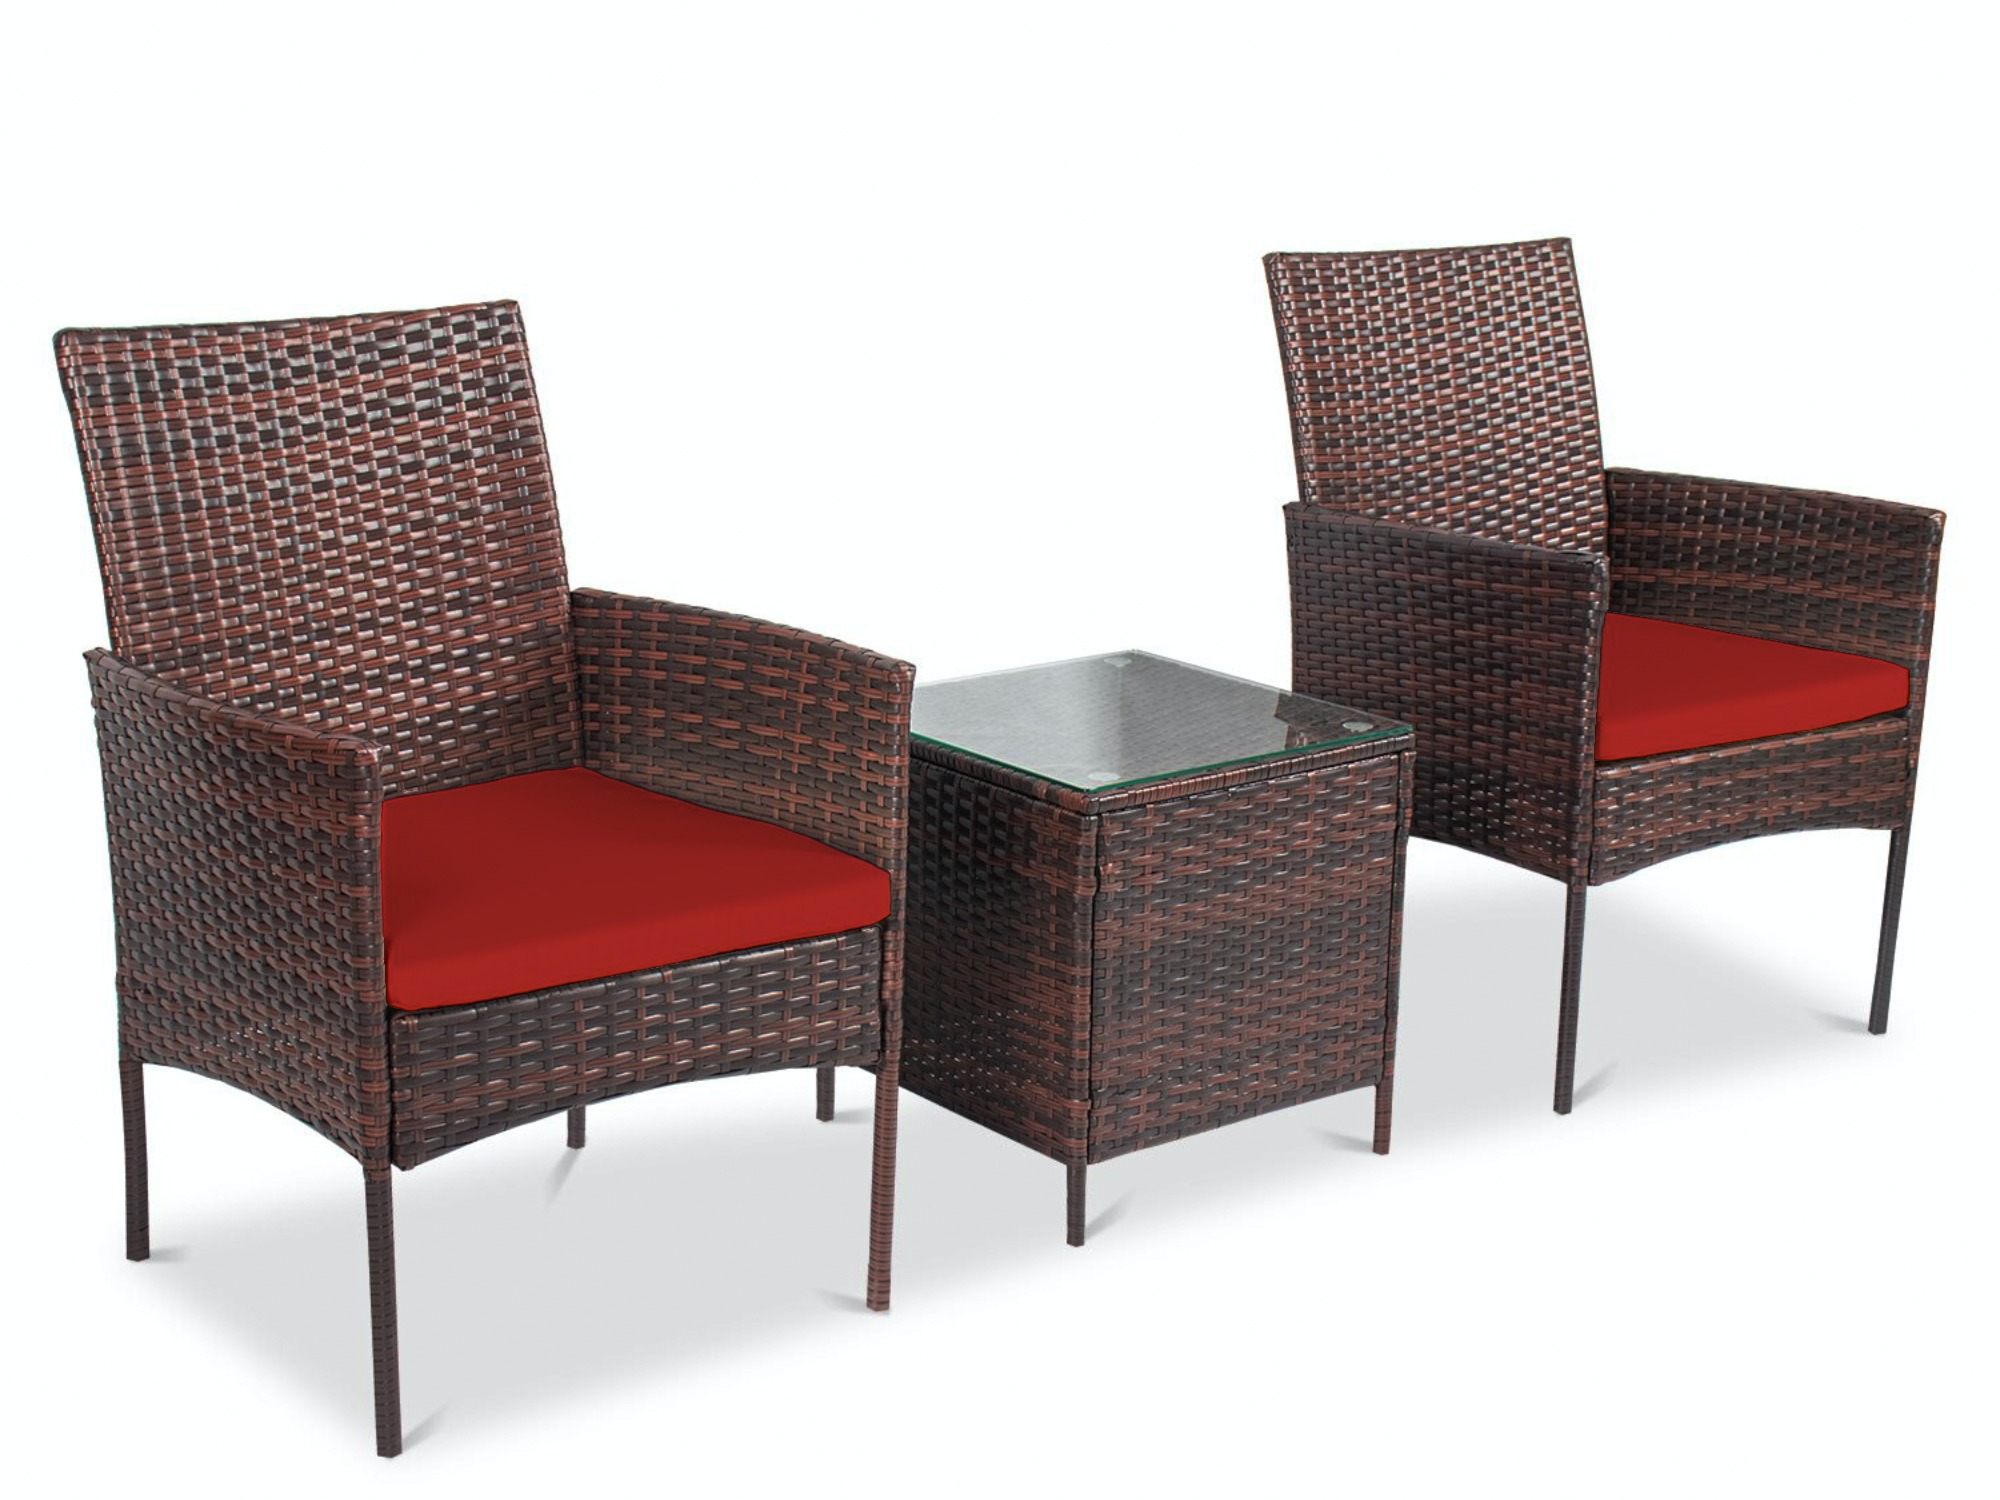 Canaan 3 Piece Rattan Quality Outdoor Furniture Set – 2 Durable Chairs With a Tea Table - Red - image 1 of 10